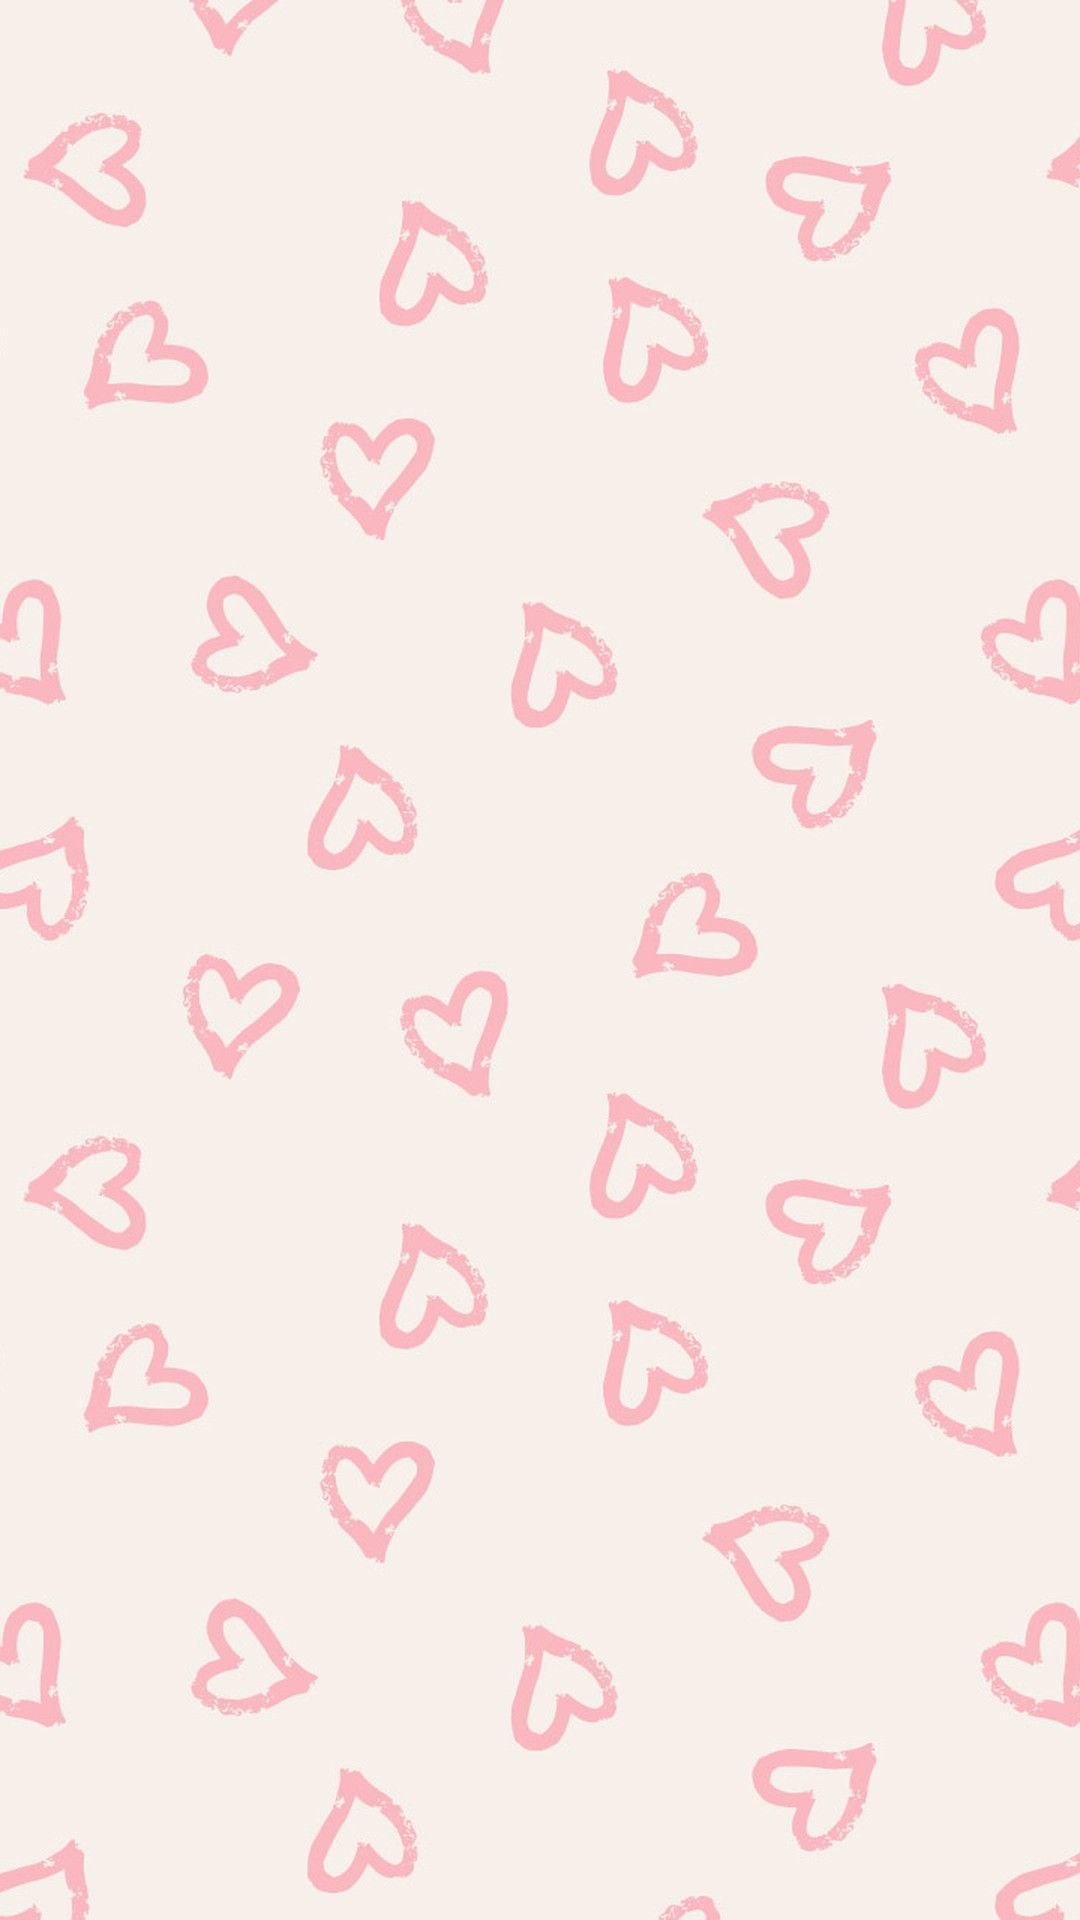 Cute pink hearts wallpaper for iPhone with high-resolution 1080x1920 pixel. You can use this wallpaper for your iPhone 5, 6, 7, 8, X, XS, XR backgrounds, Mobile Screensaver, or iPad Lock Screen - Preppy